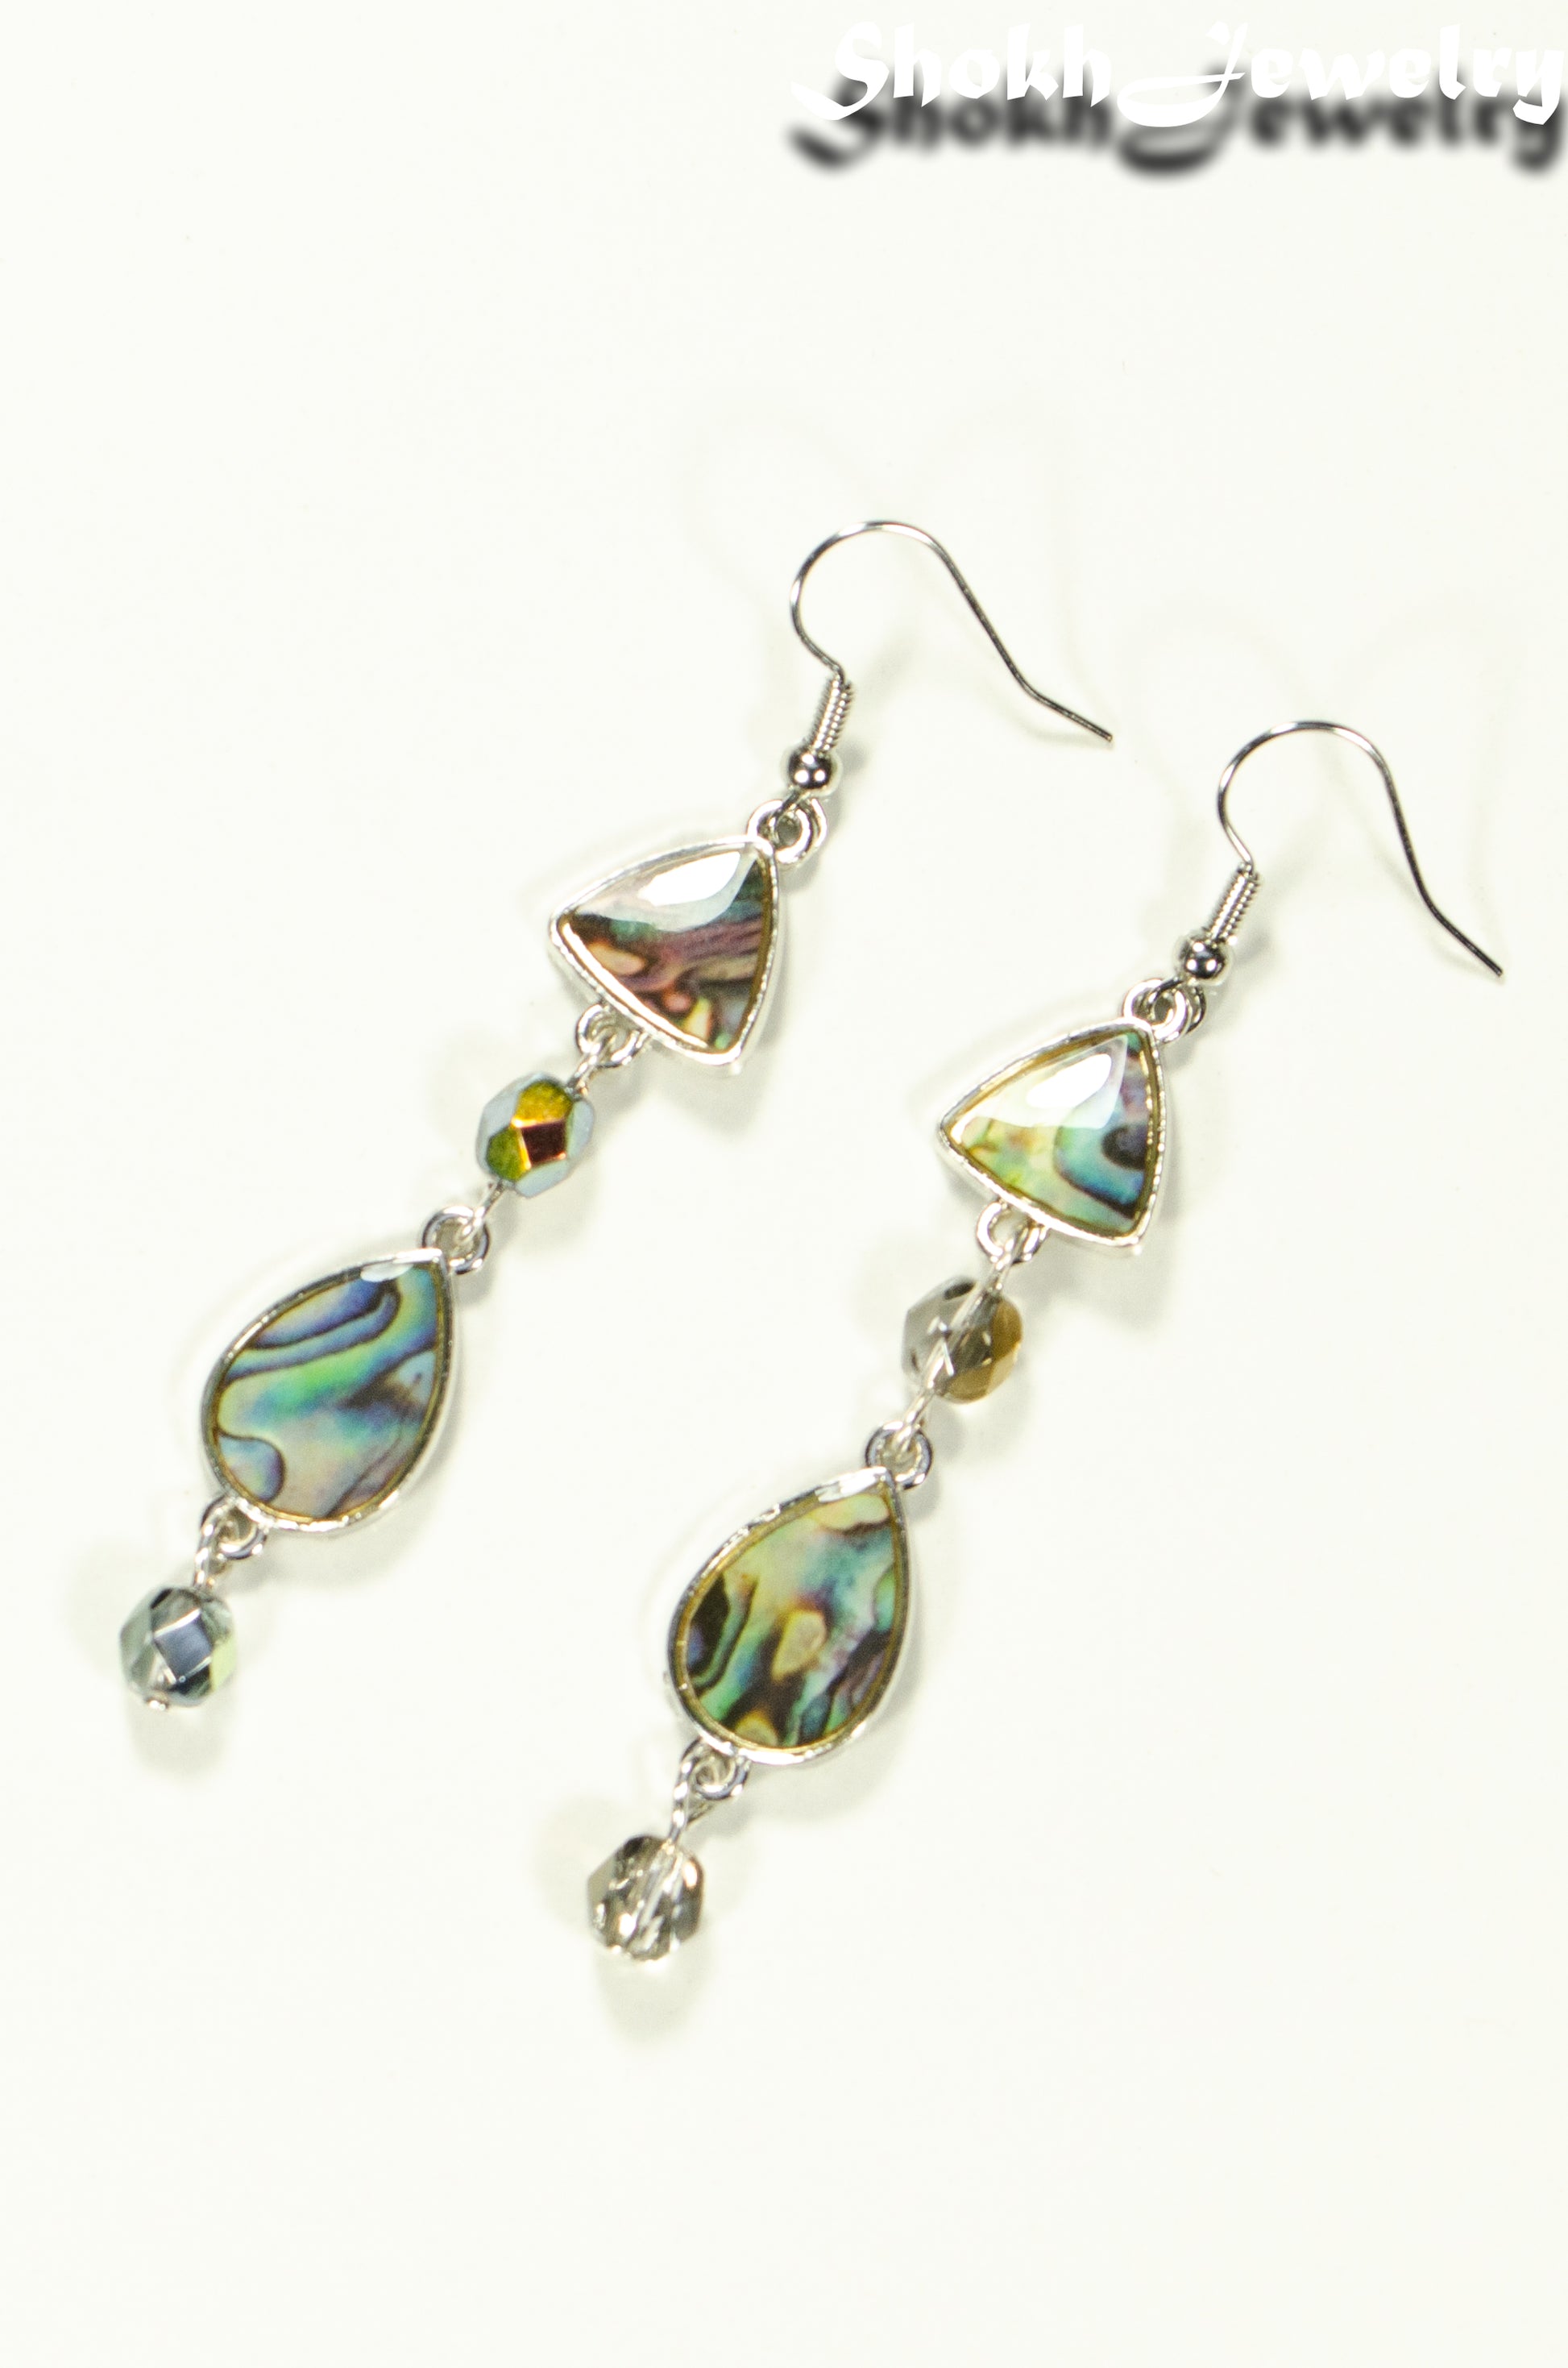 Top view of Long Abalone Shell and Glass Crystal Earrings.